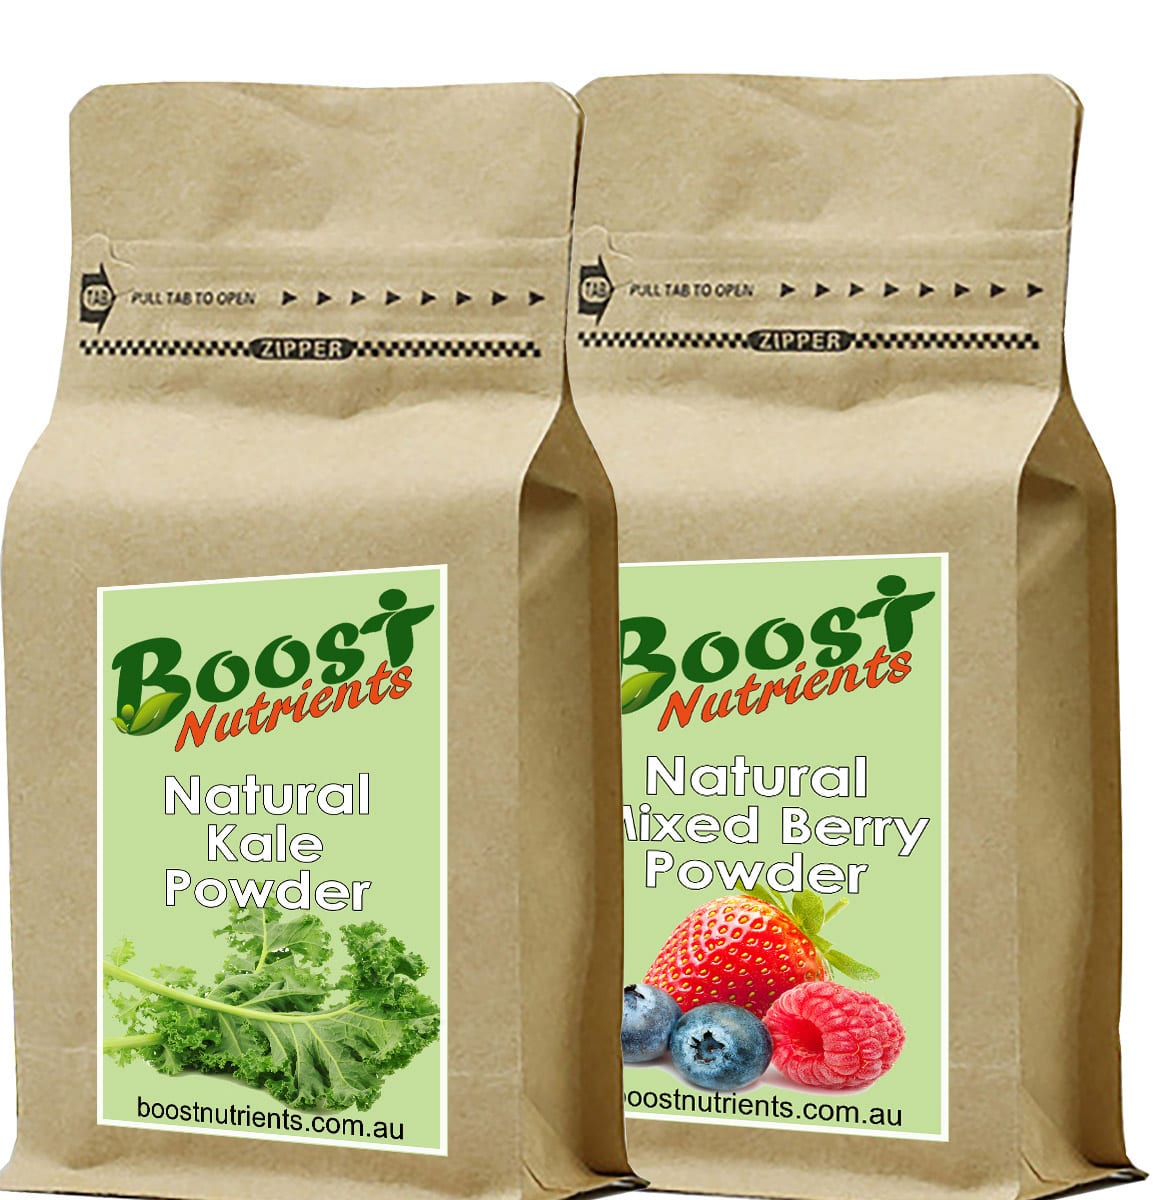 Boost Nutrients Fruit and vegetable powders - Acai Bowl Toppings and Smoothie ingredients